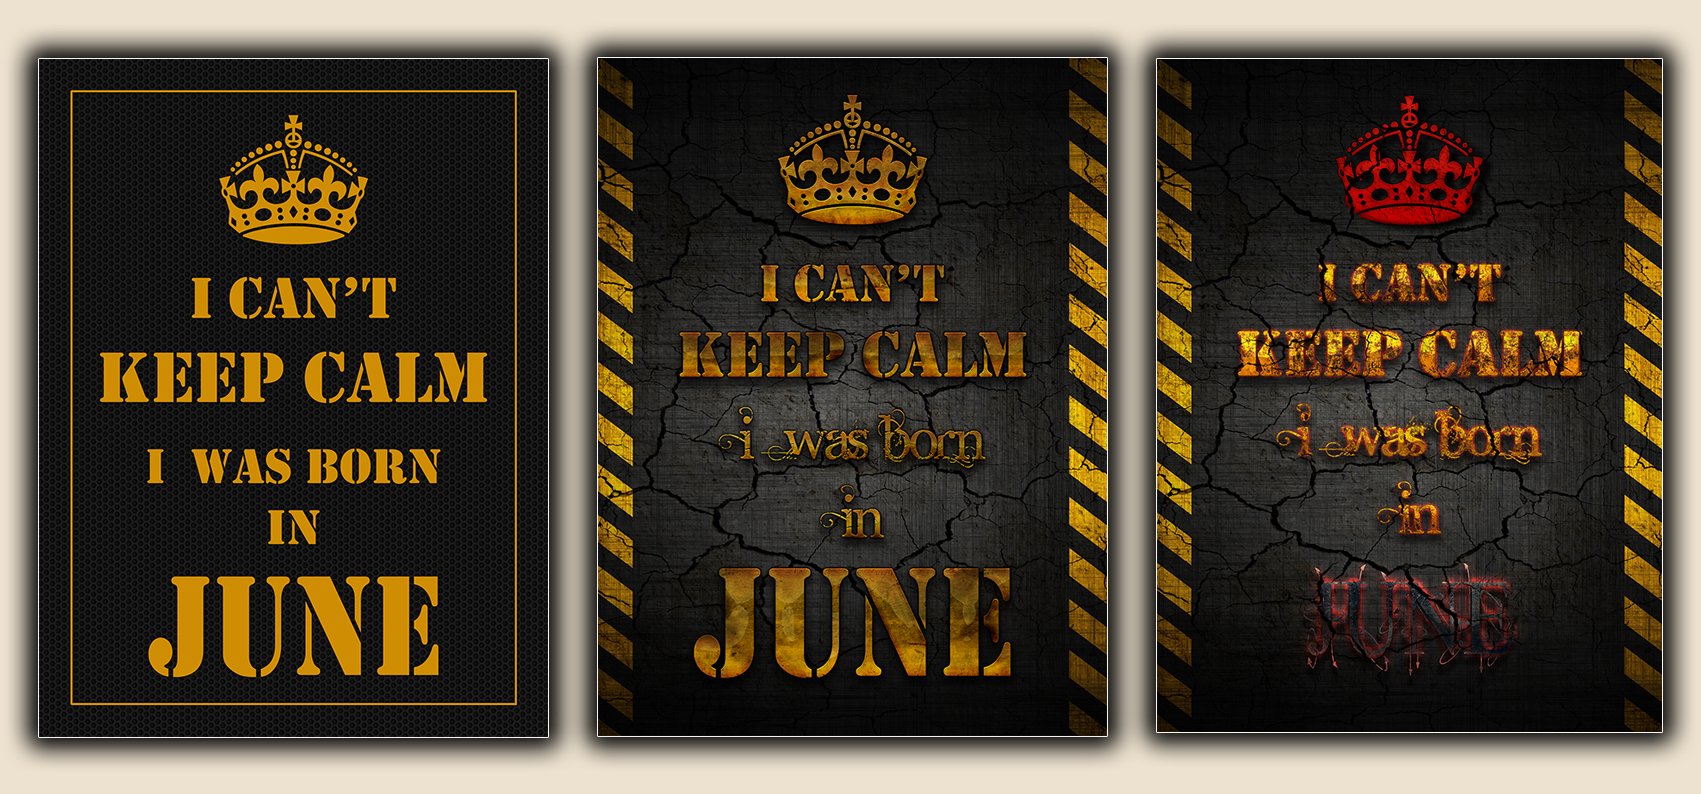 I Can't Keep Calm - I was Born in June